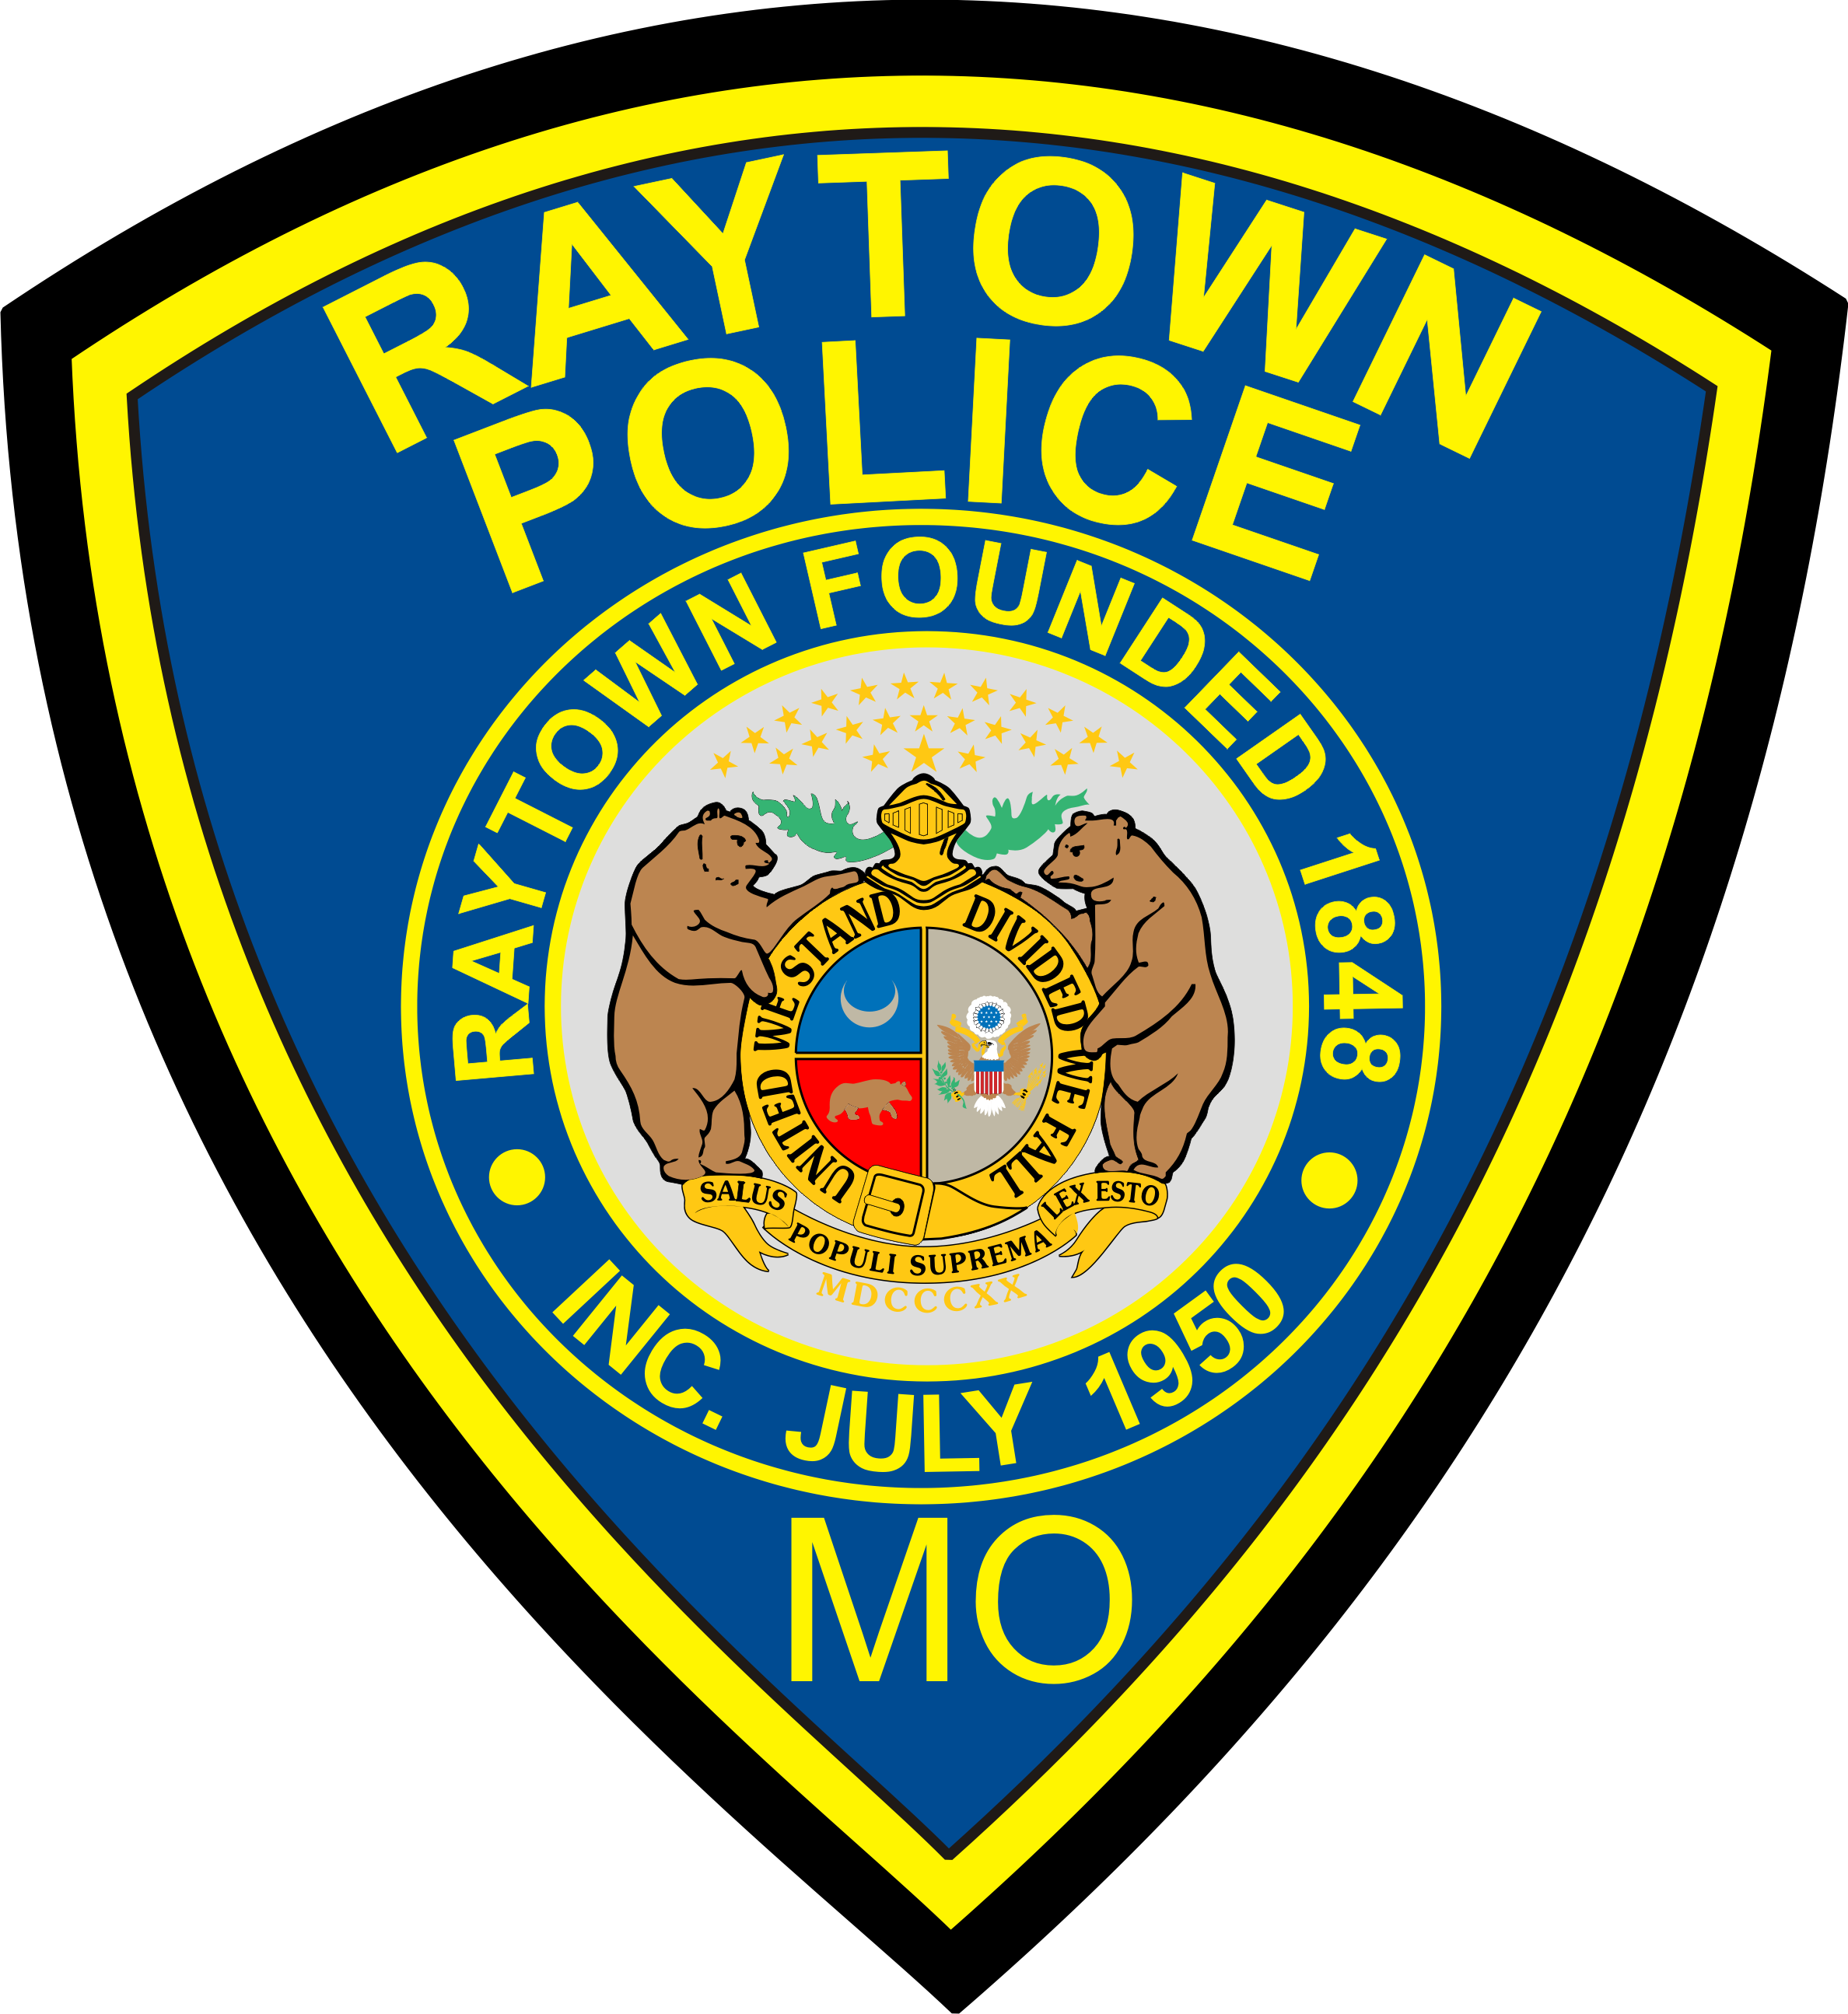 Raytown Police Looking For Graphic Designer To Design - Police Patch Degigns (2376x2590)